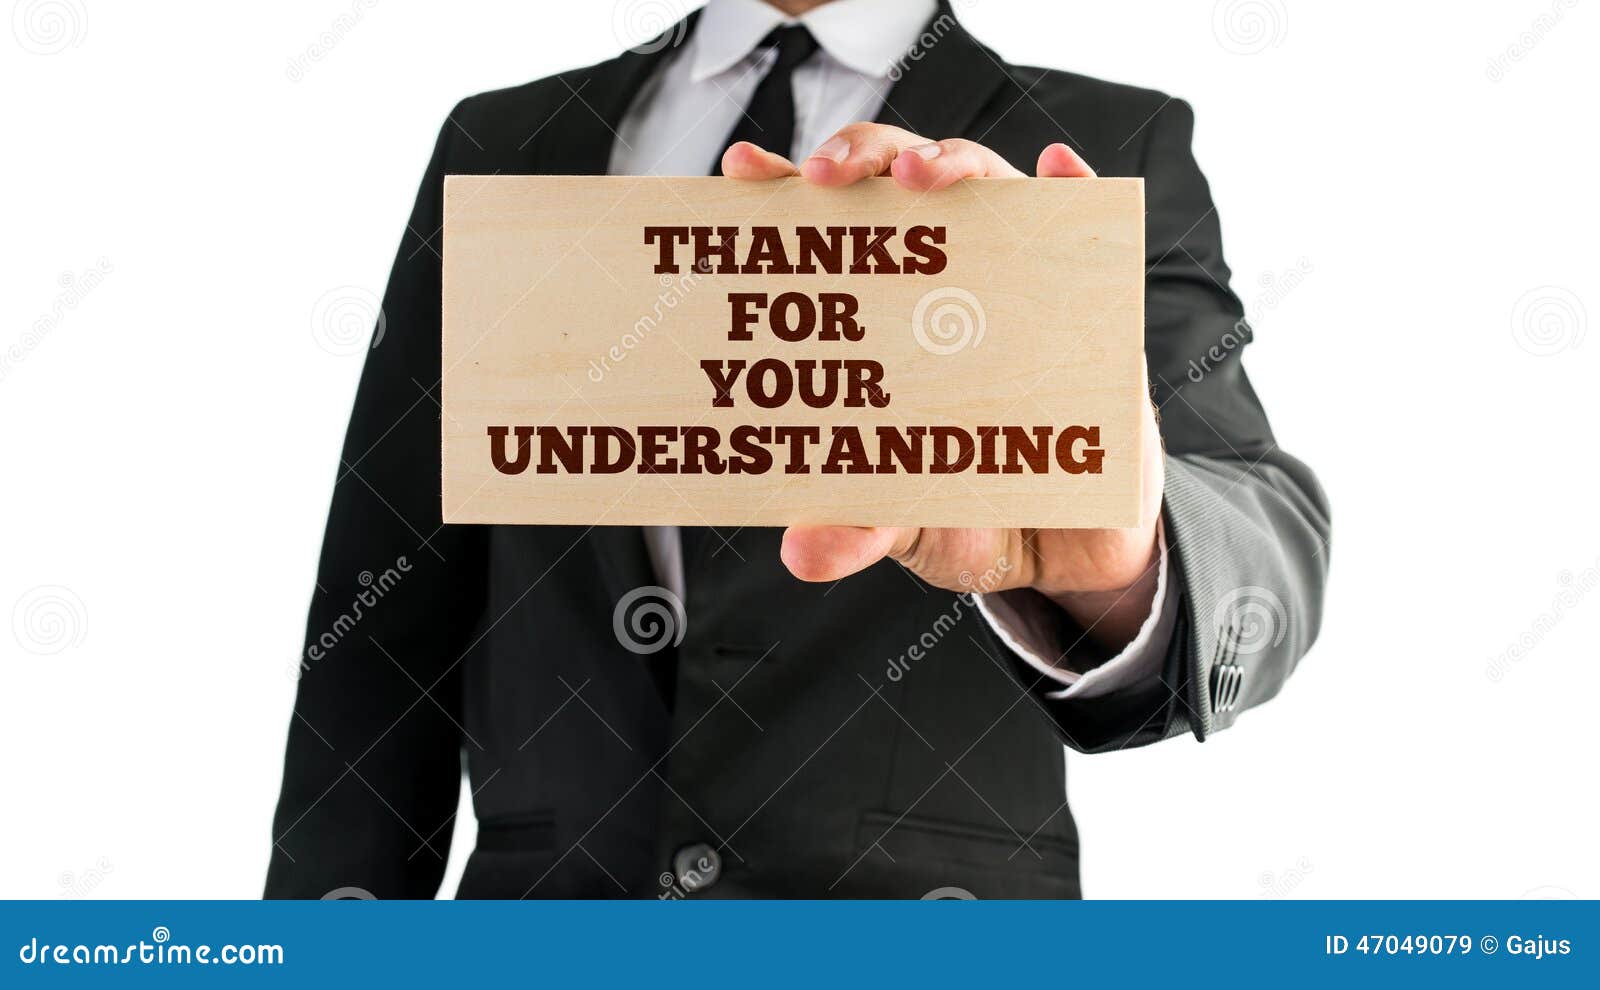 Thanks For Your Understanding Stock Image Image Of Communication Holding